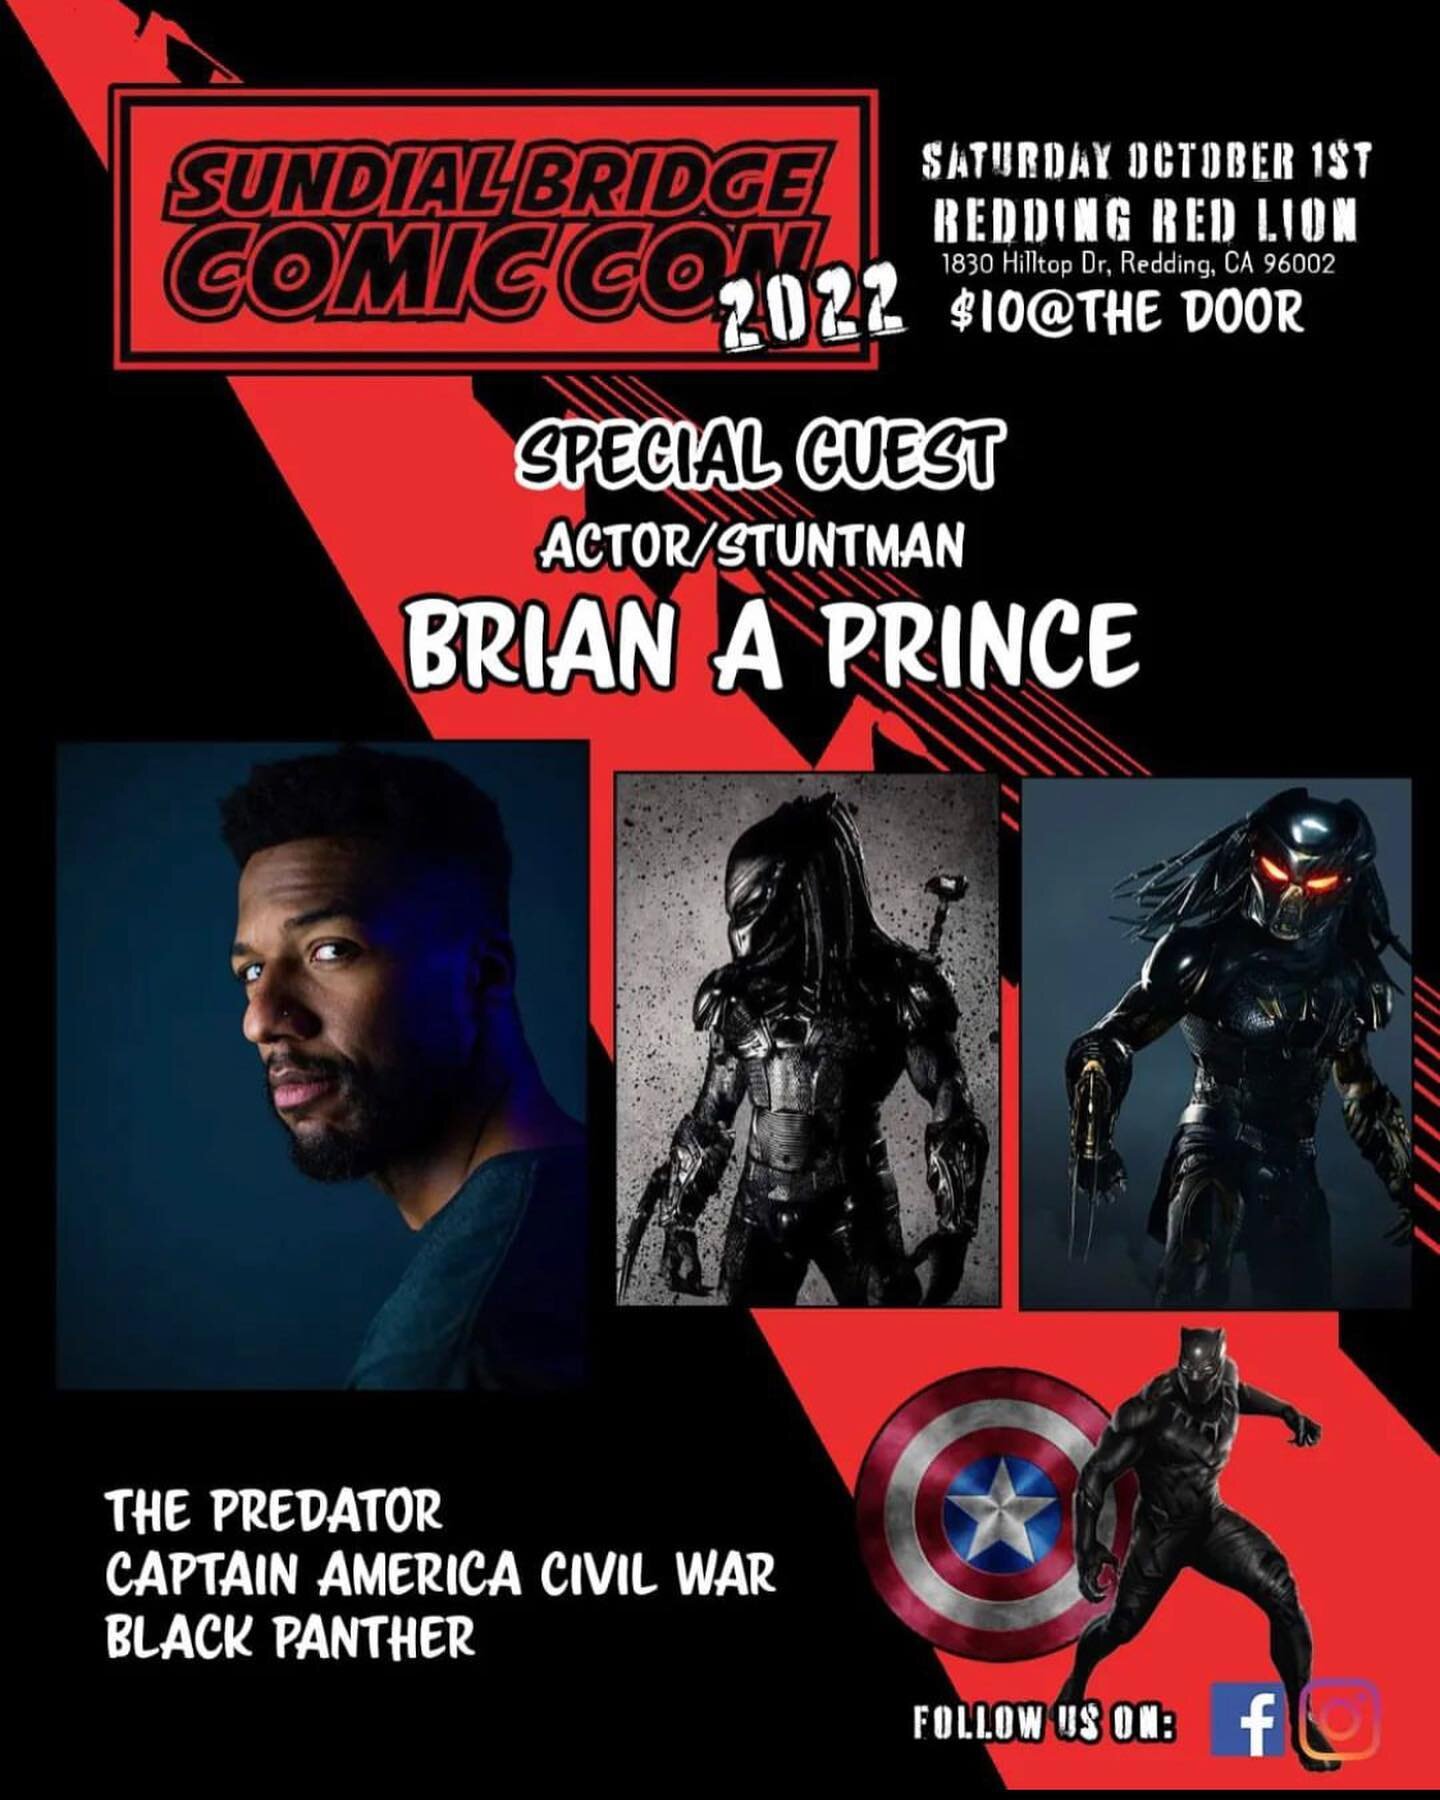 Yo California!!!

I&rsquo;m stoked to announce that this weekend I&rsquo;ll be attending the SUNDIAL BRIDGE COMIC CON in Redding, CA!

Place: Redding Red Lion
Date: Saturday, October 1, 2022
Time: 10am-6pm

I&rsquo;m going to be there alongside some 